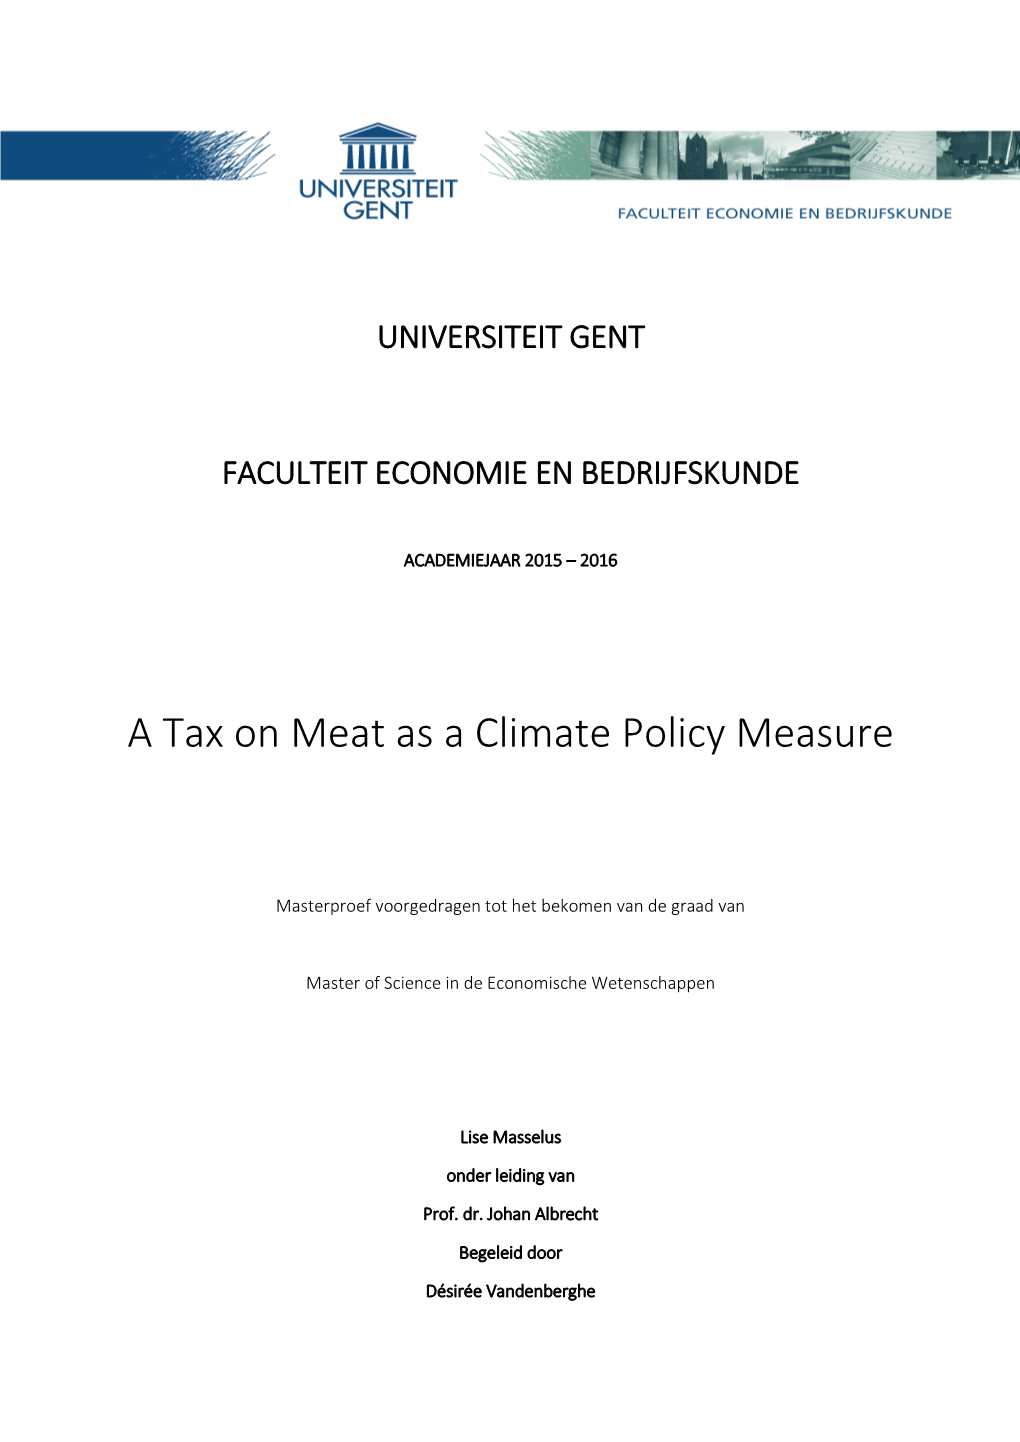 A Tax on Meat As a Climate Policy Measure